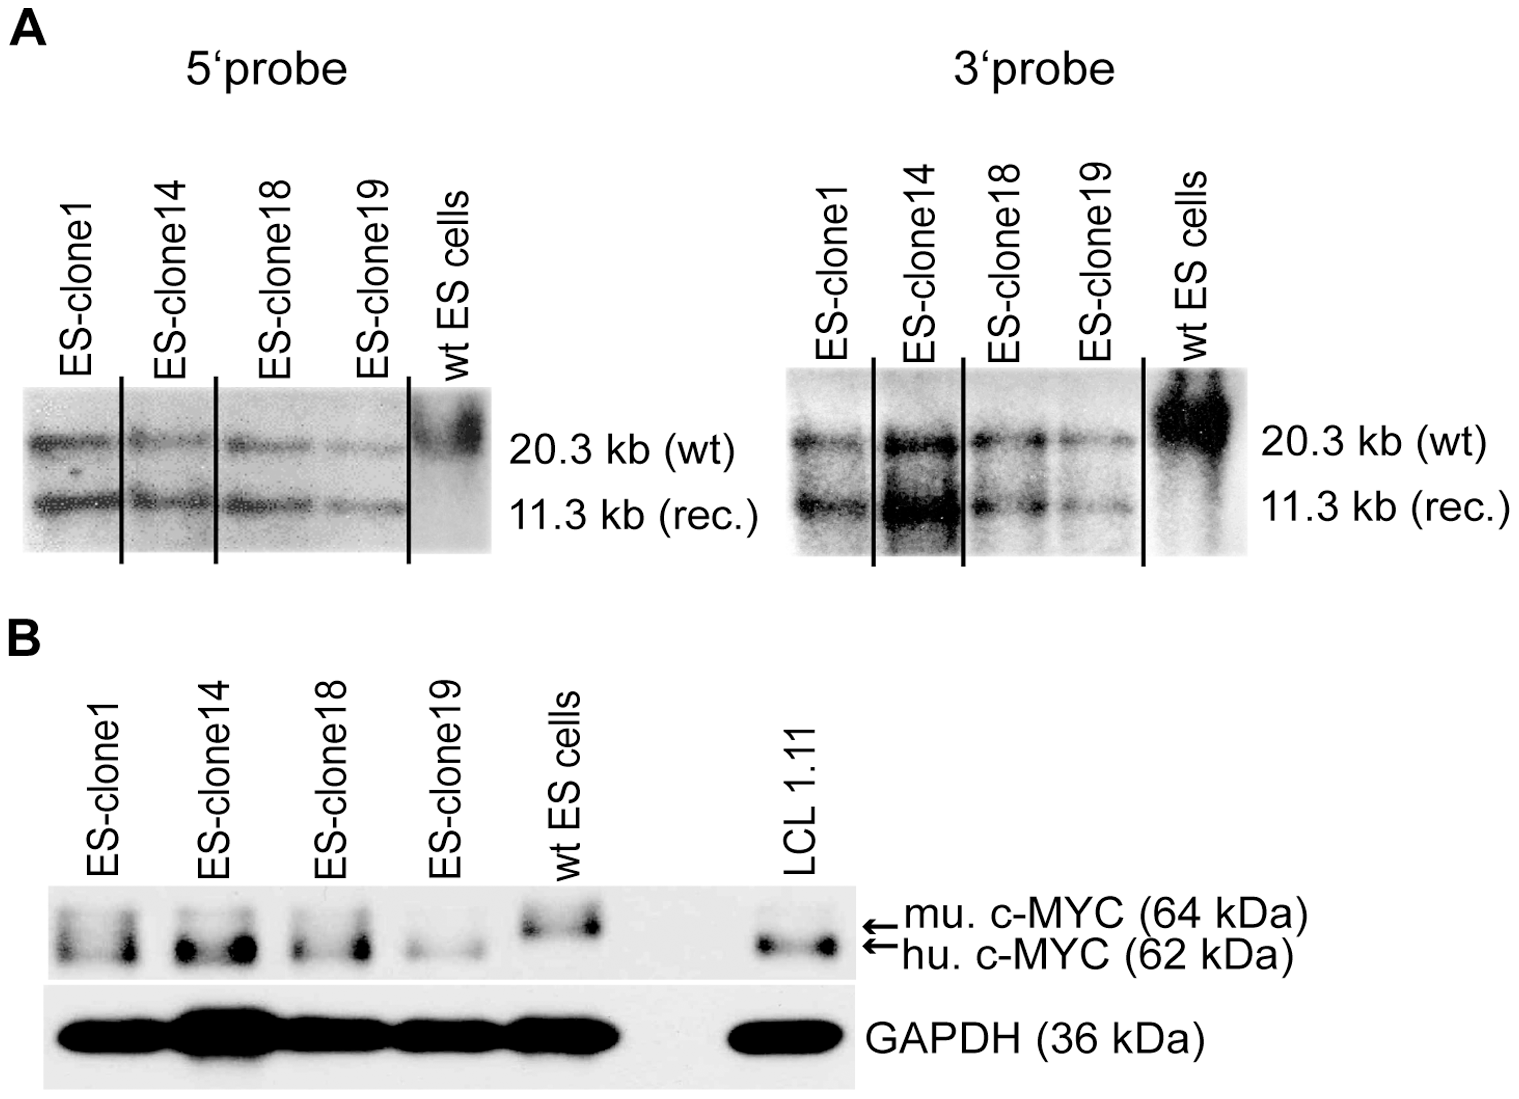 Z3333865.homologous recombination and c-MYC2 expression in ES cell clones.png